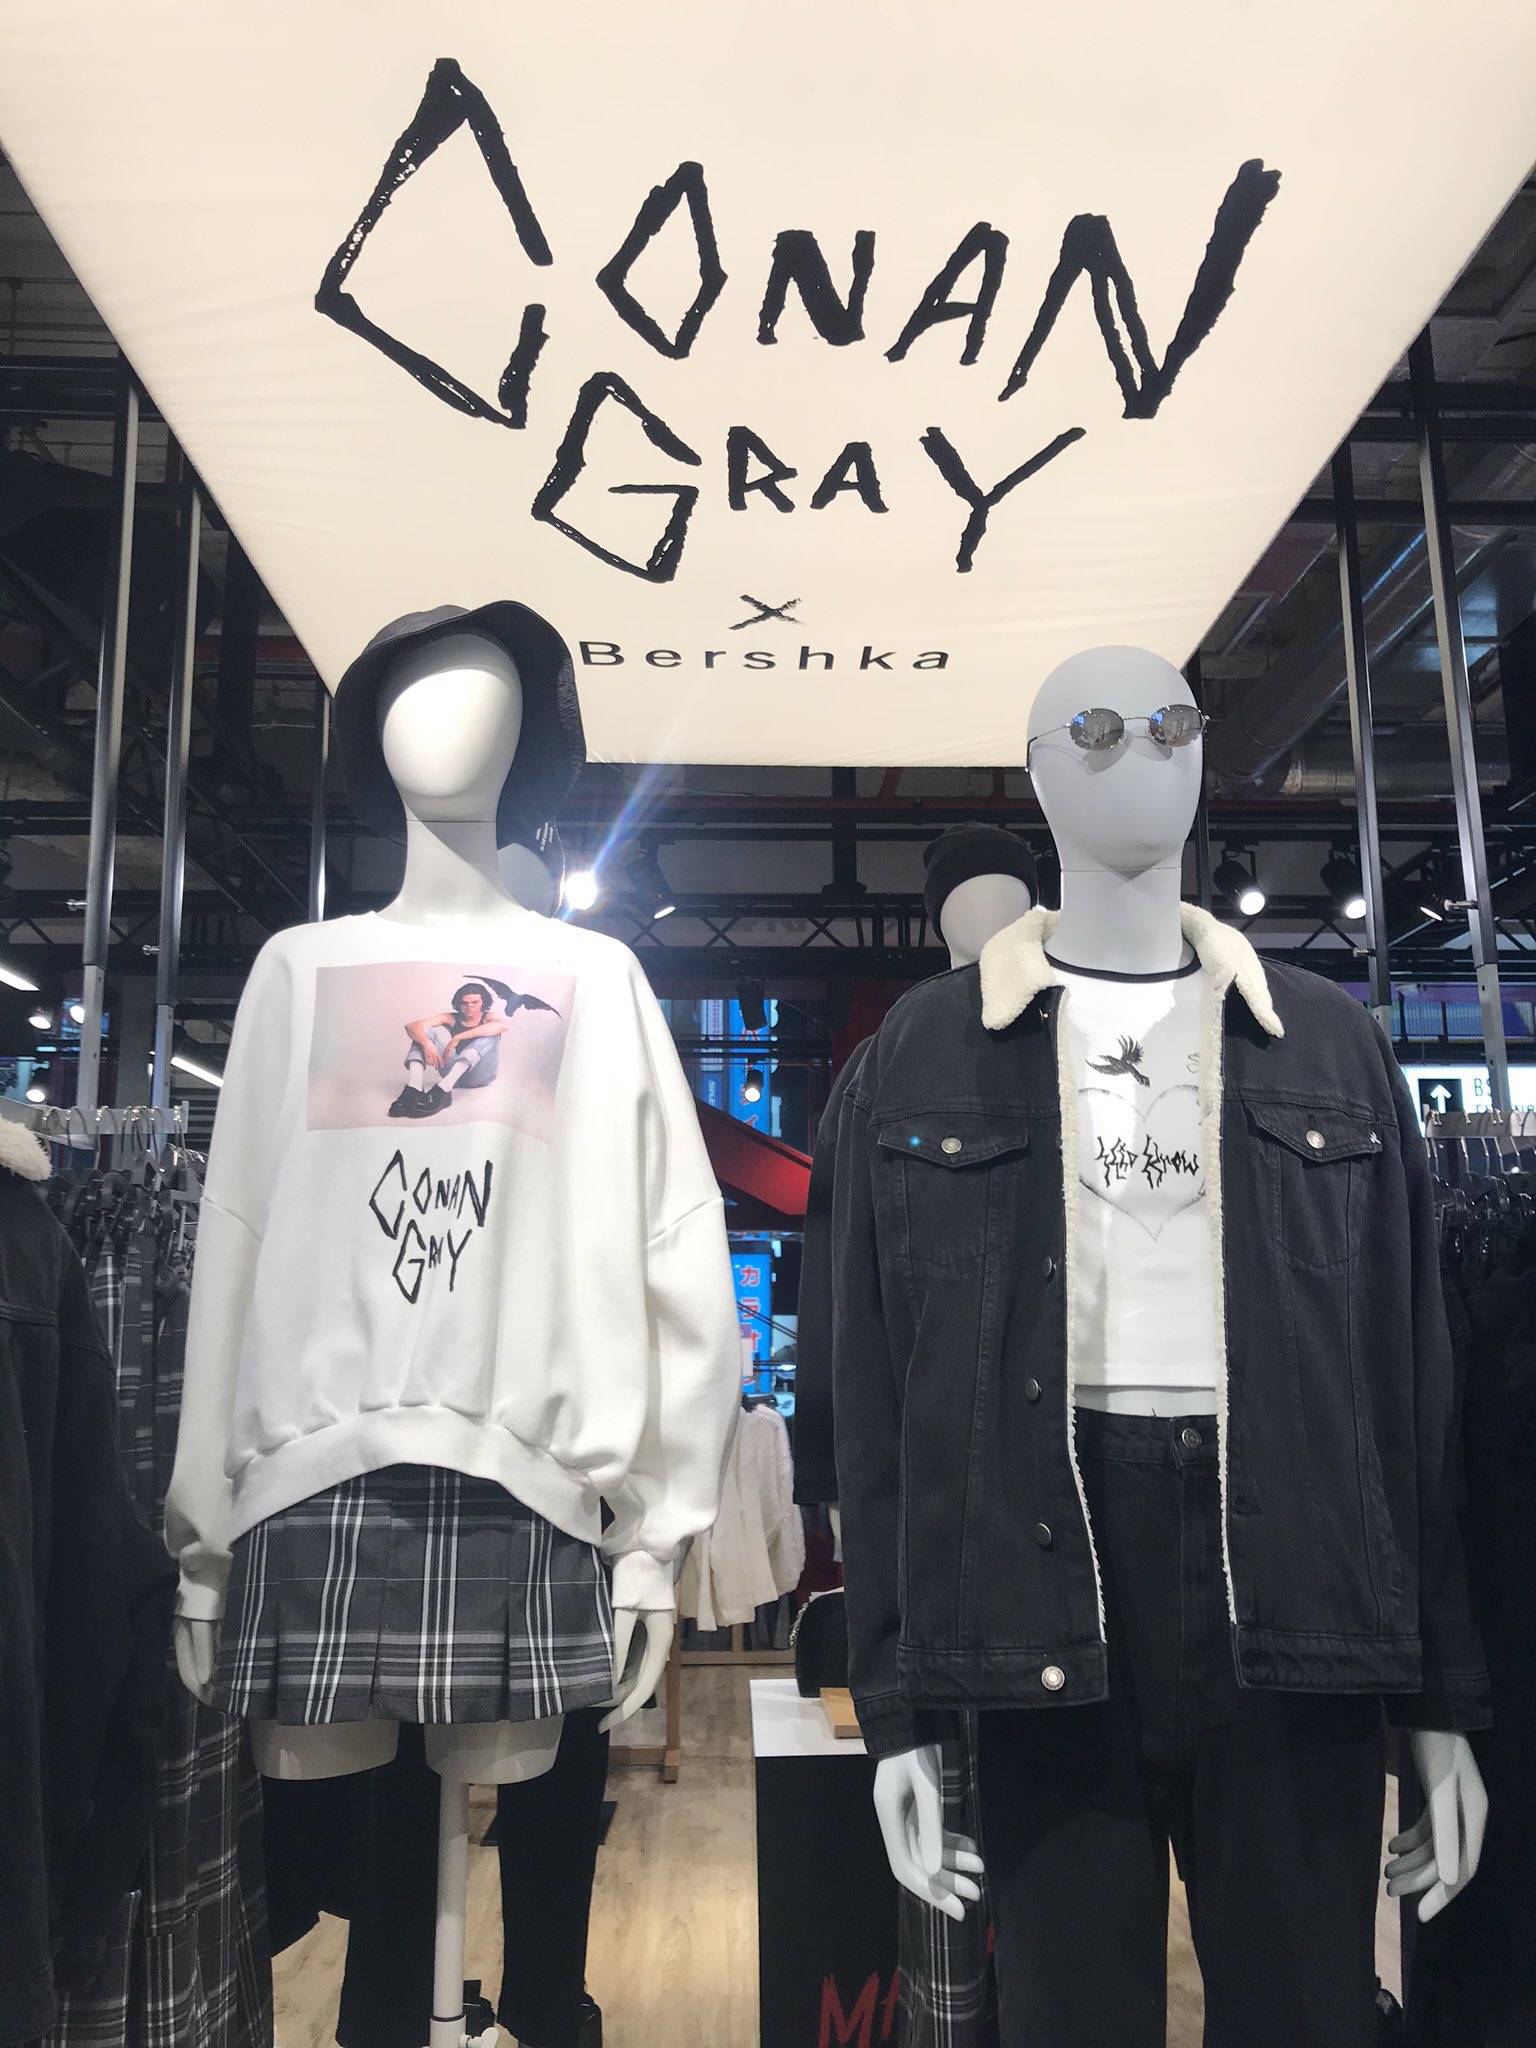 Grit Pakket Melodieus conan gray updates on Twitter: "display of the conan's bershka collection  which is available in stores now! (10/16) ©️@6mari2  https://t.co/AJACtSwlJg" / Twitter